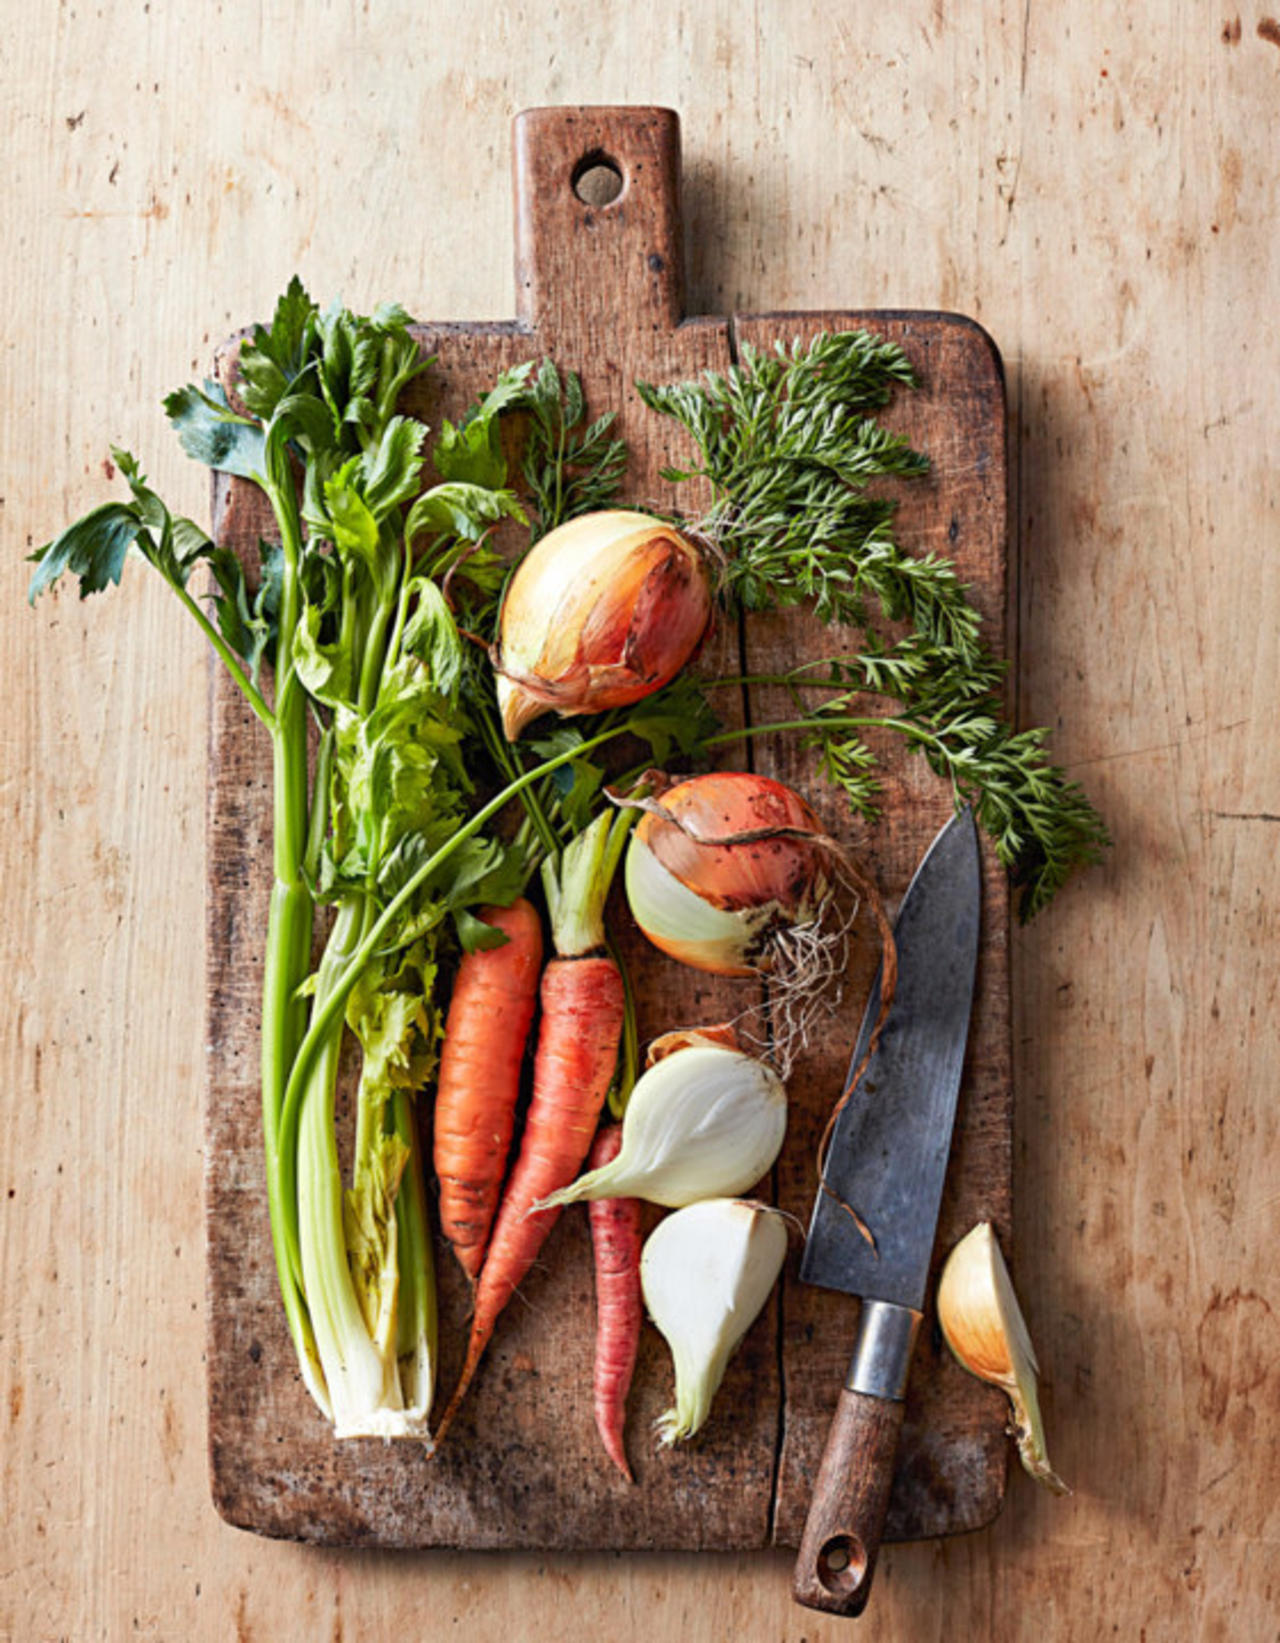 What's the Best Way to Make a Quick Vegetable Stock?